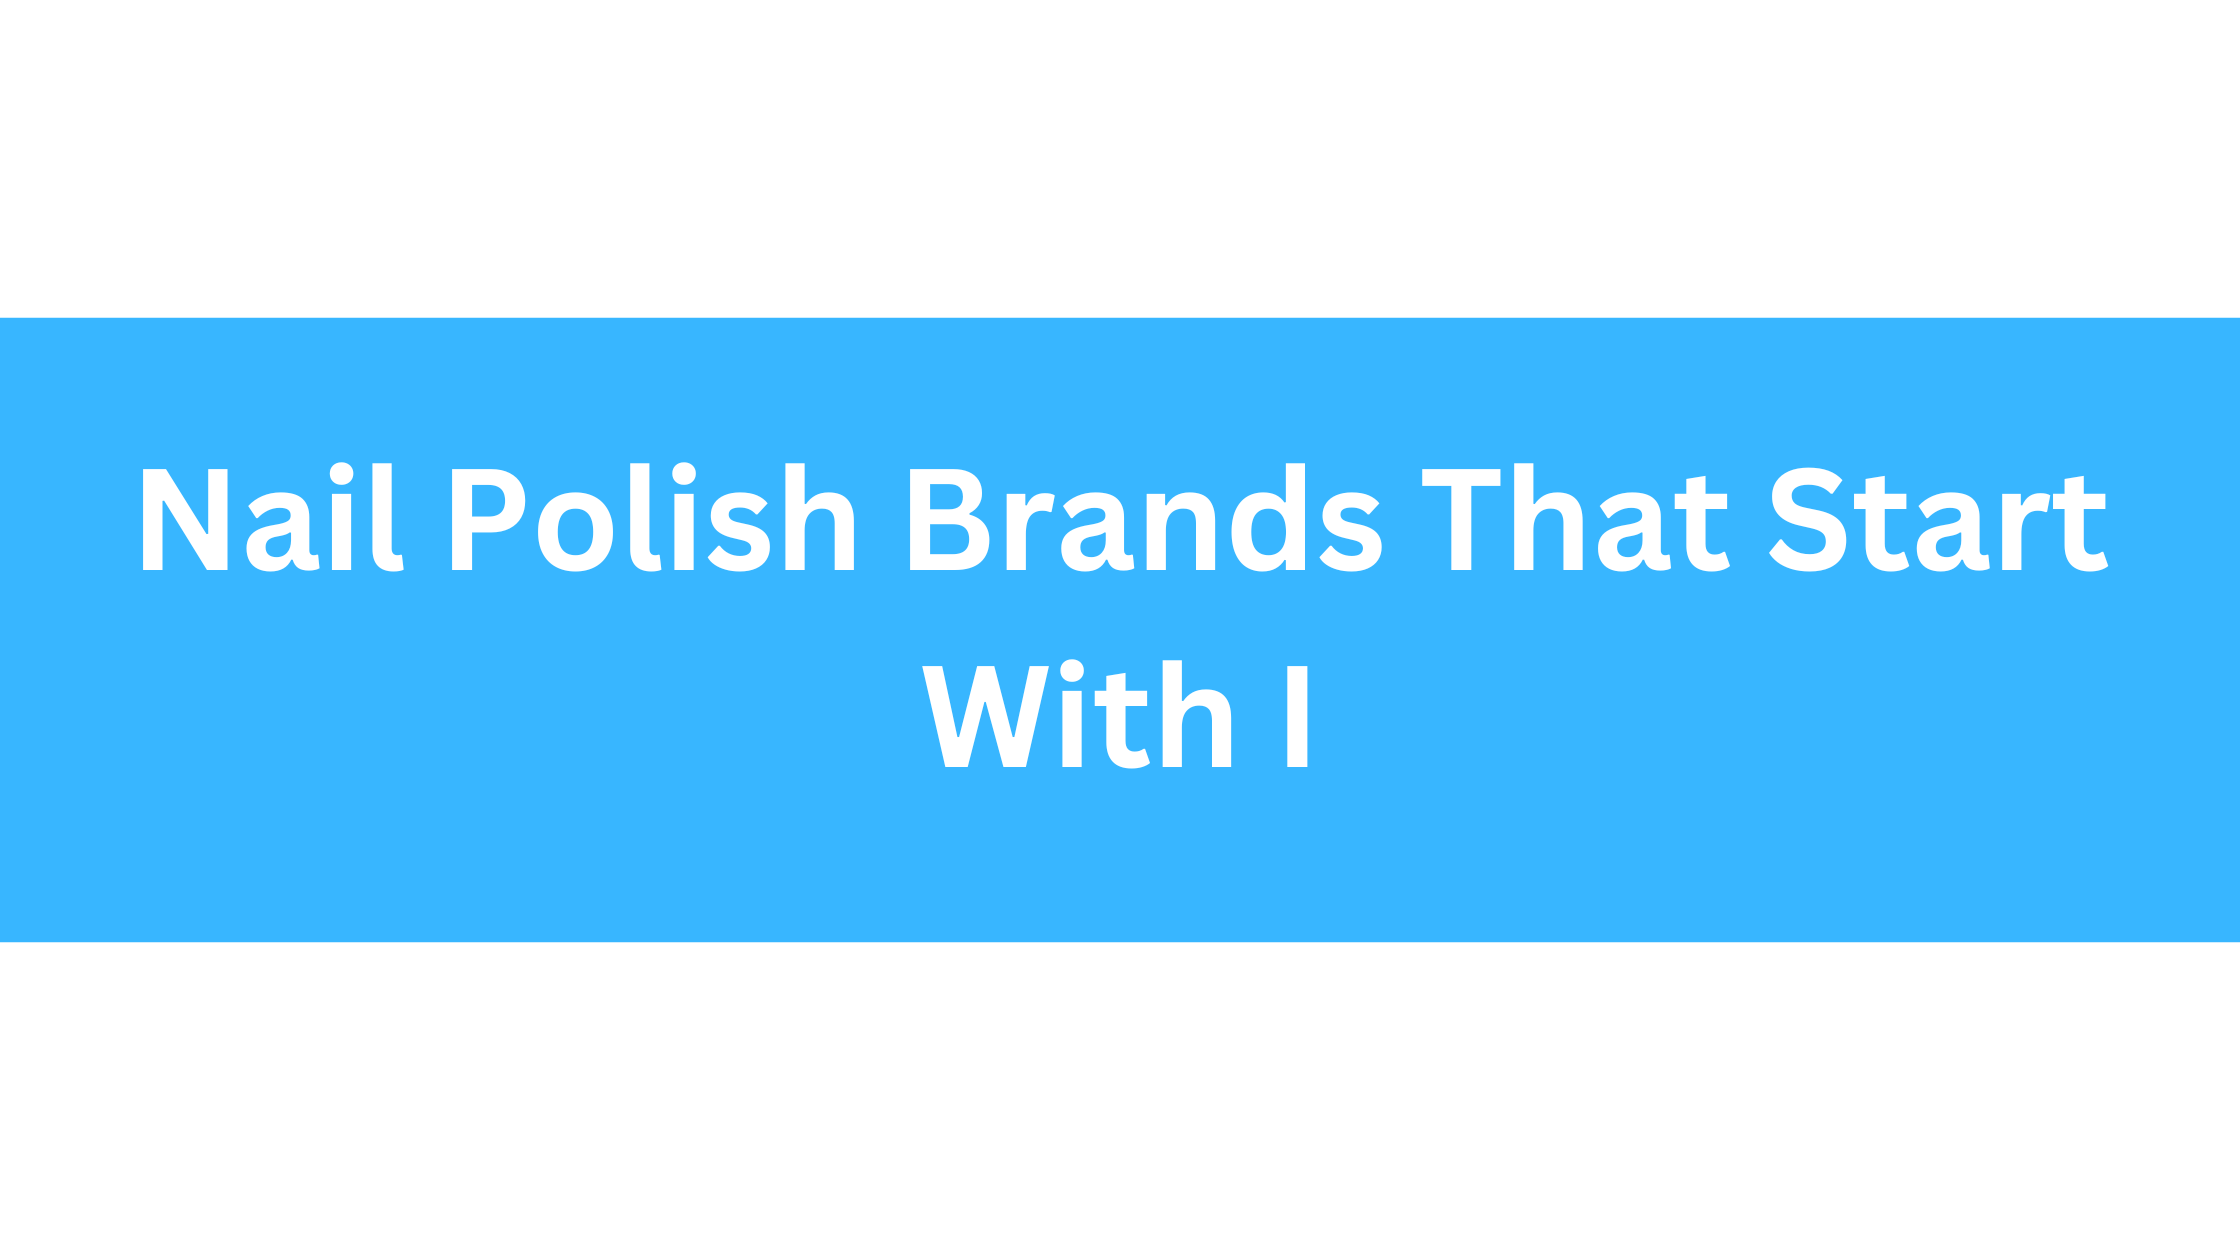 Nail Polish Brands That Start With I